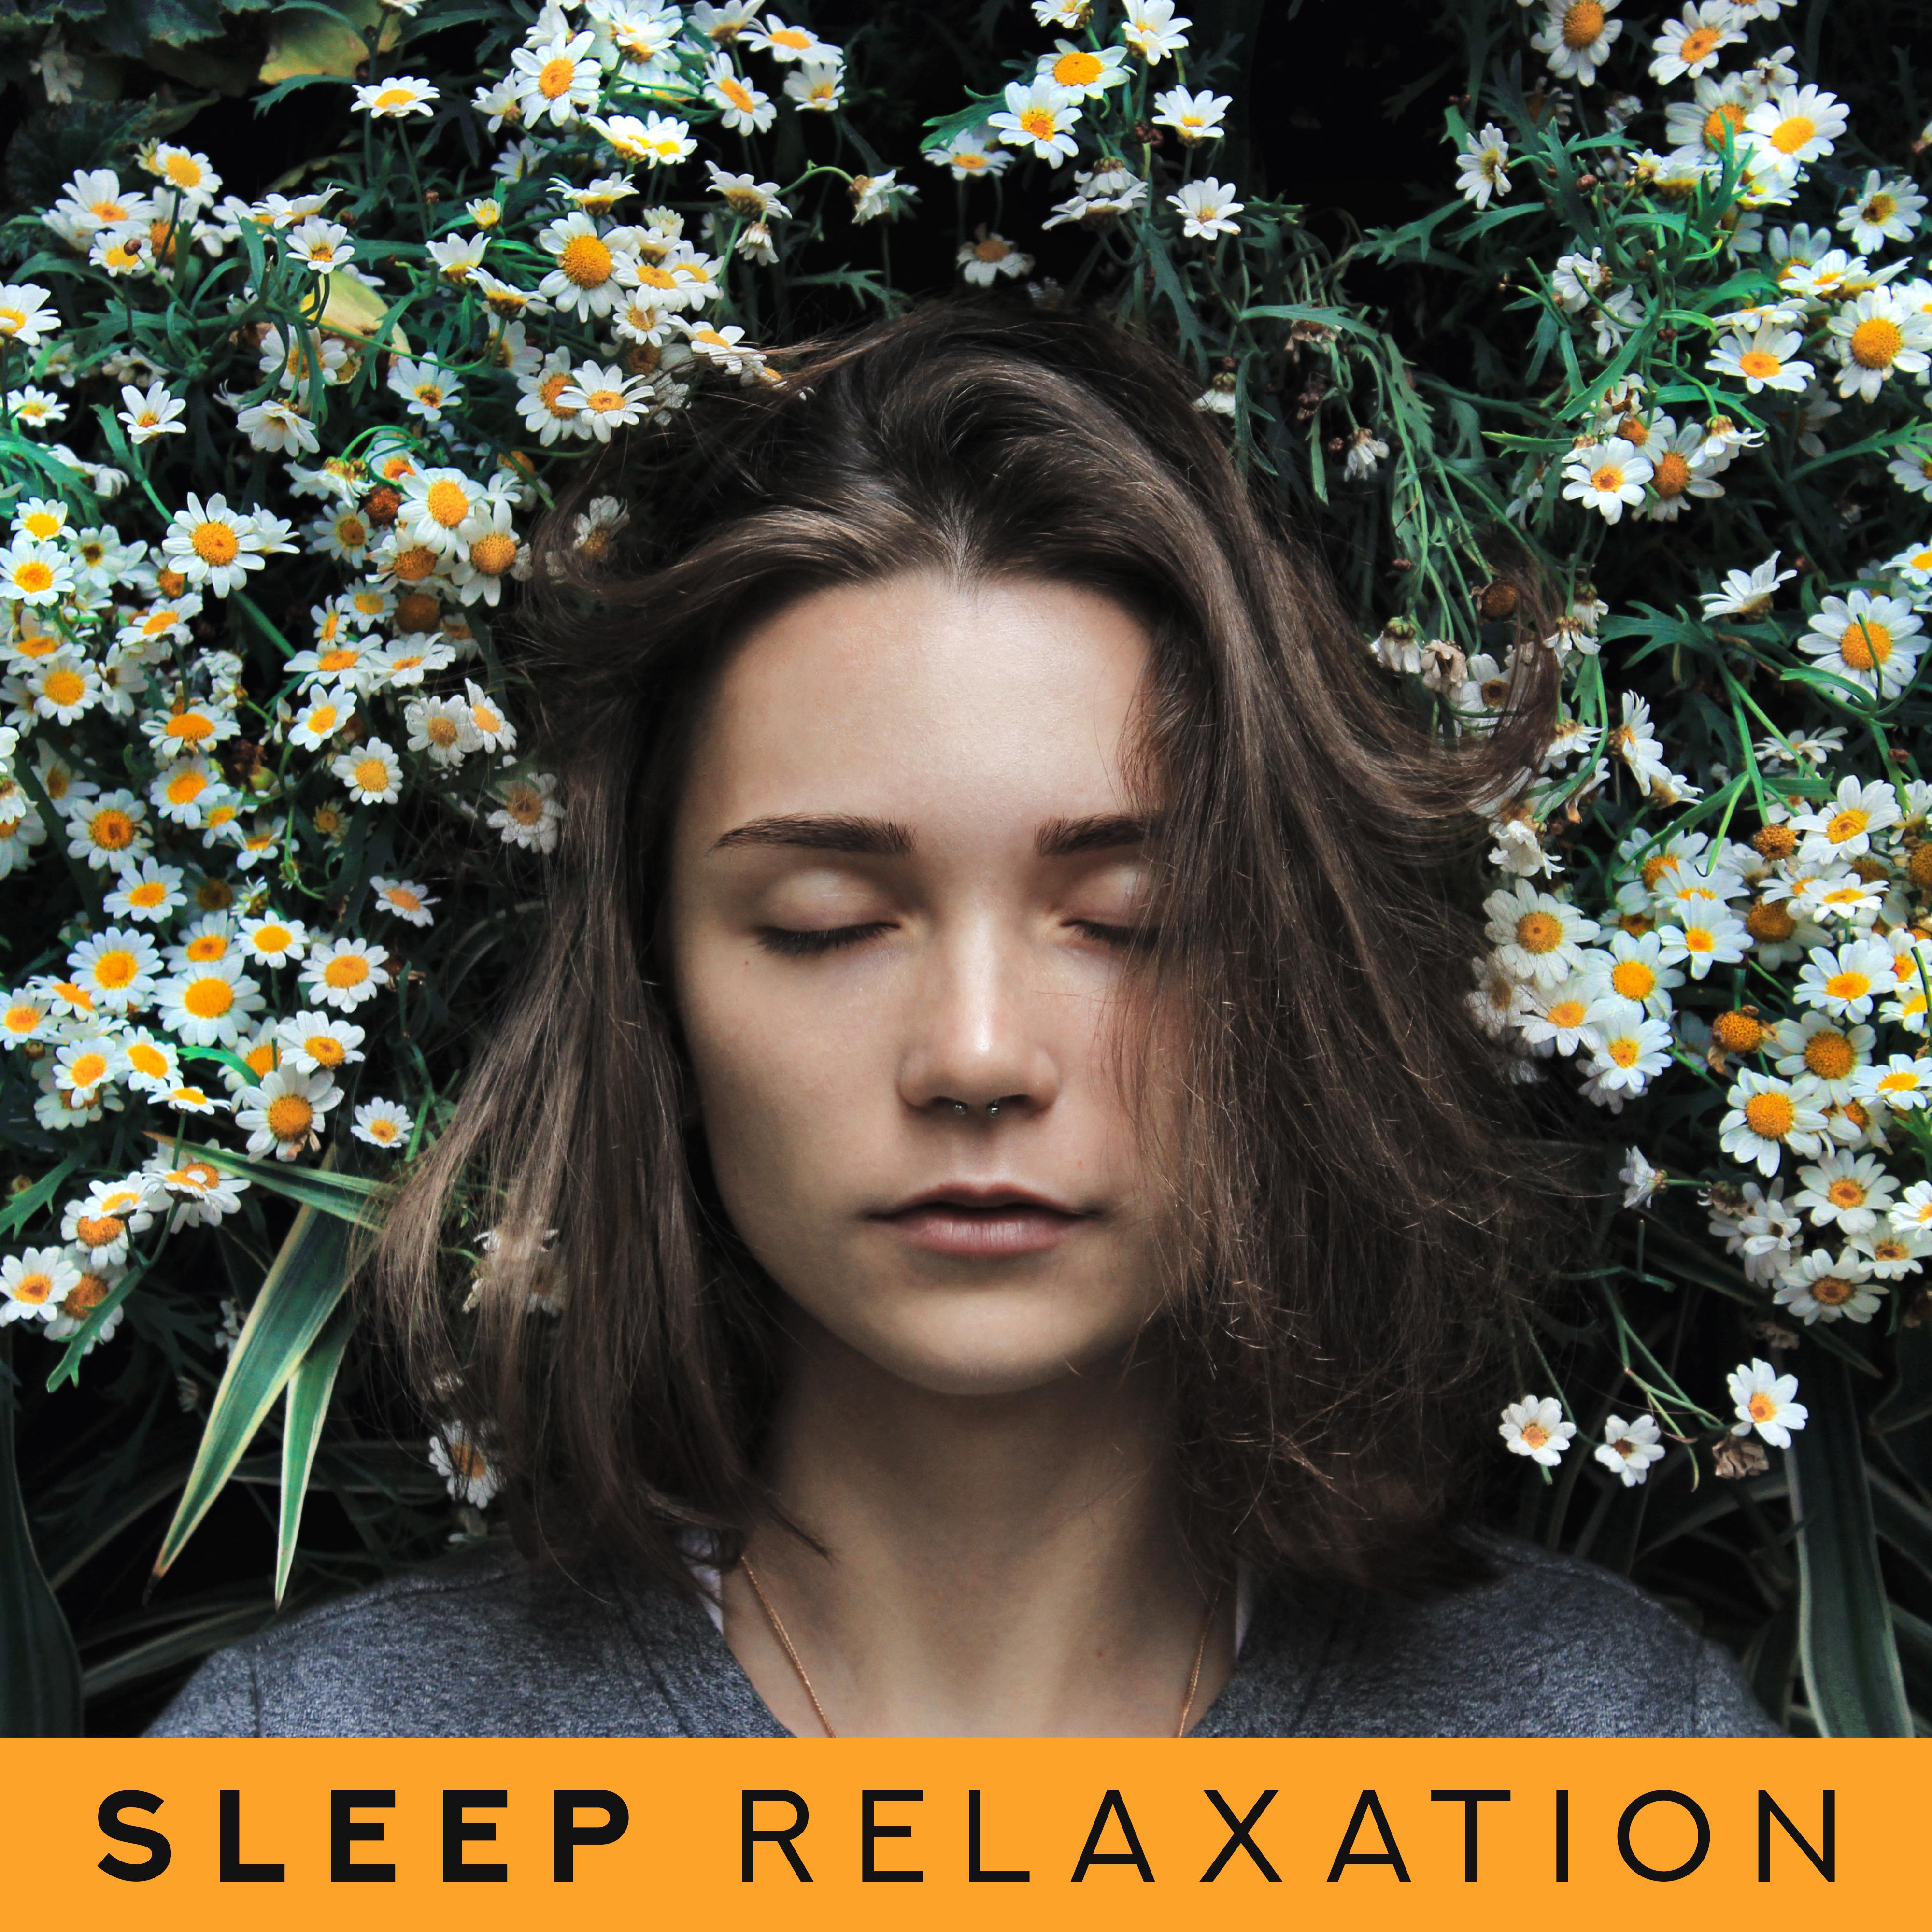 Sleep Relaxation – Healing Music to Rest, Sleep, Relaxation, Sleep Songs, Relaxing Lullabies to Calm Down, Soothing Sounds at Night